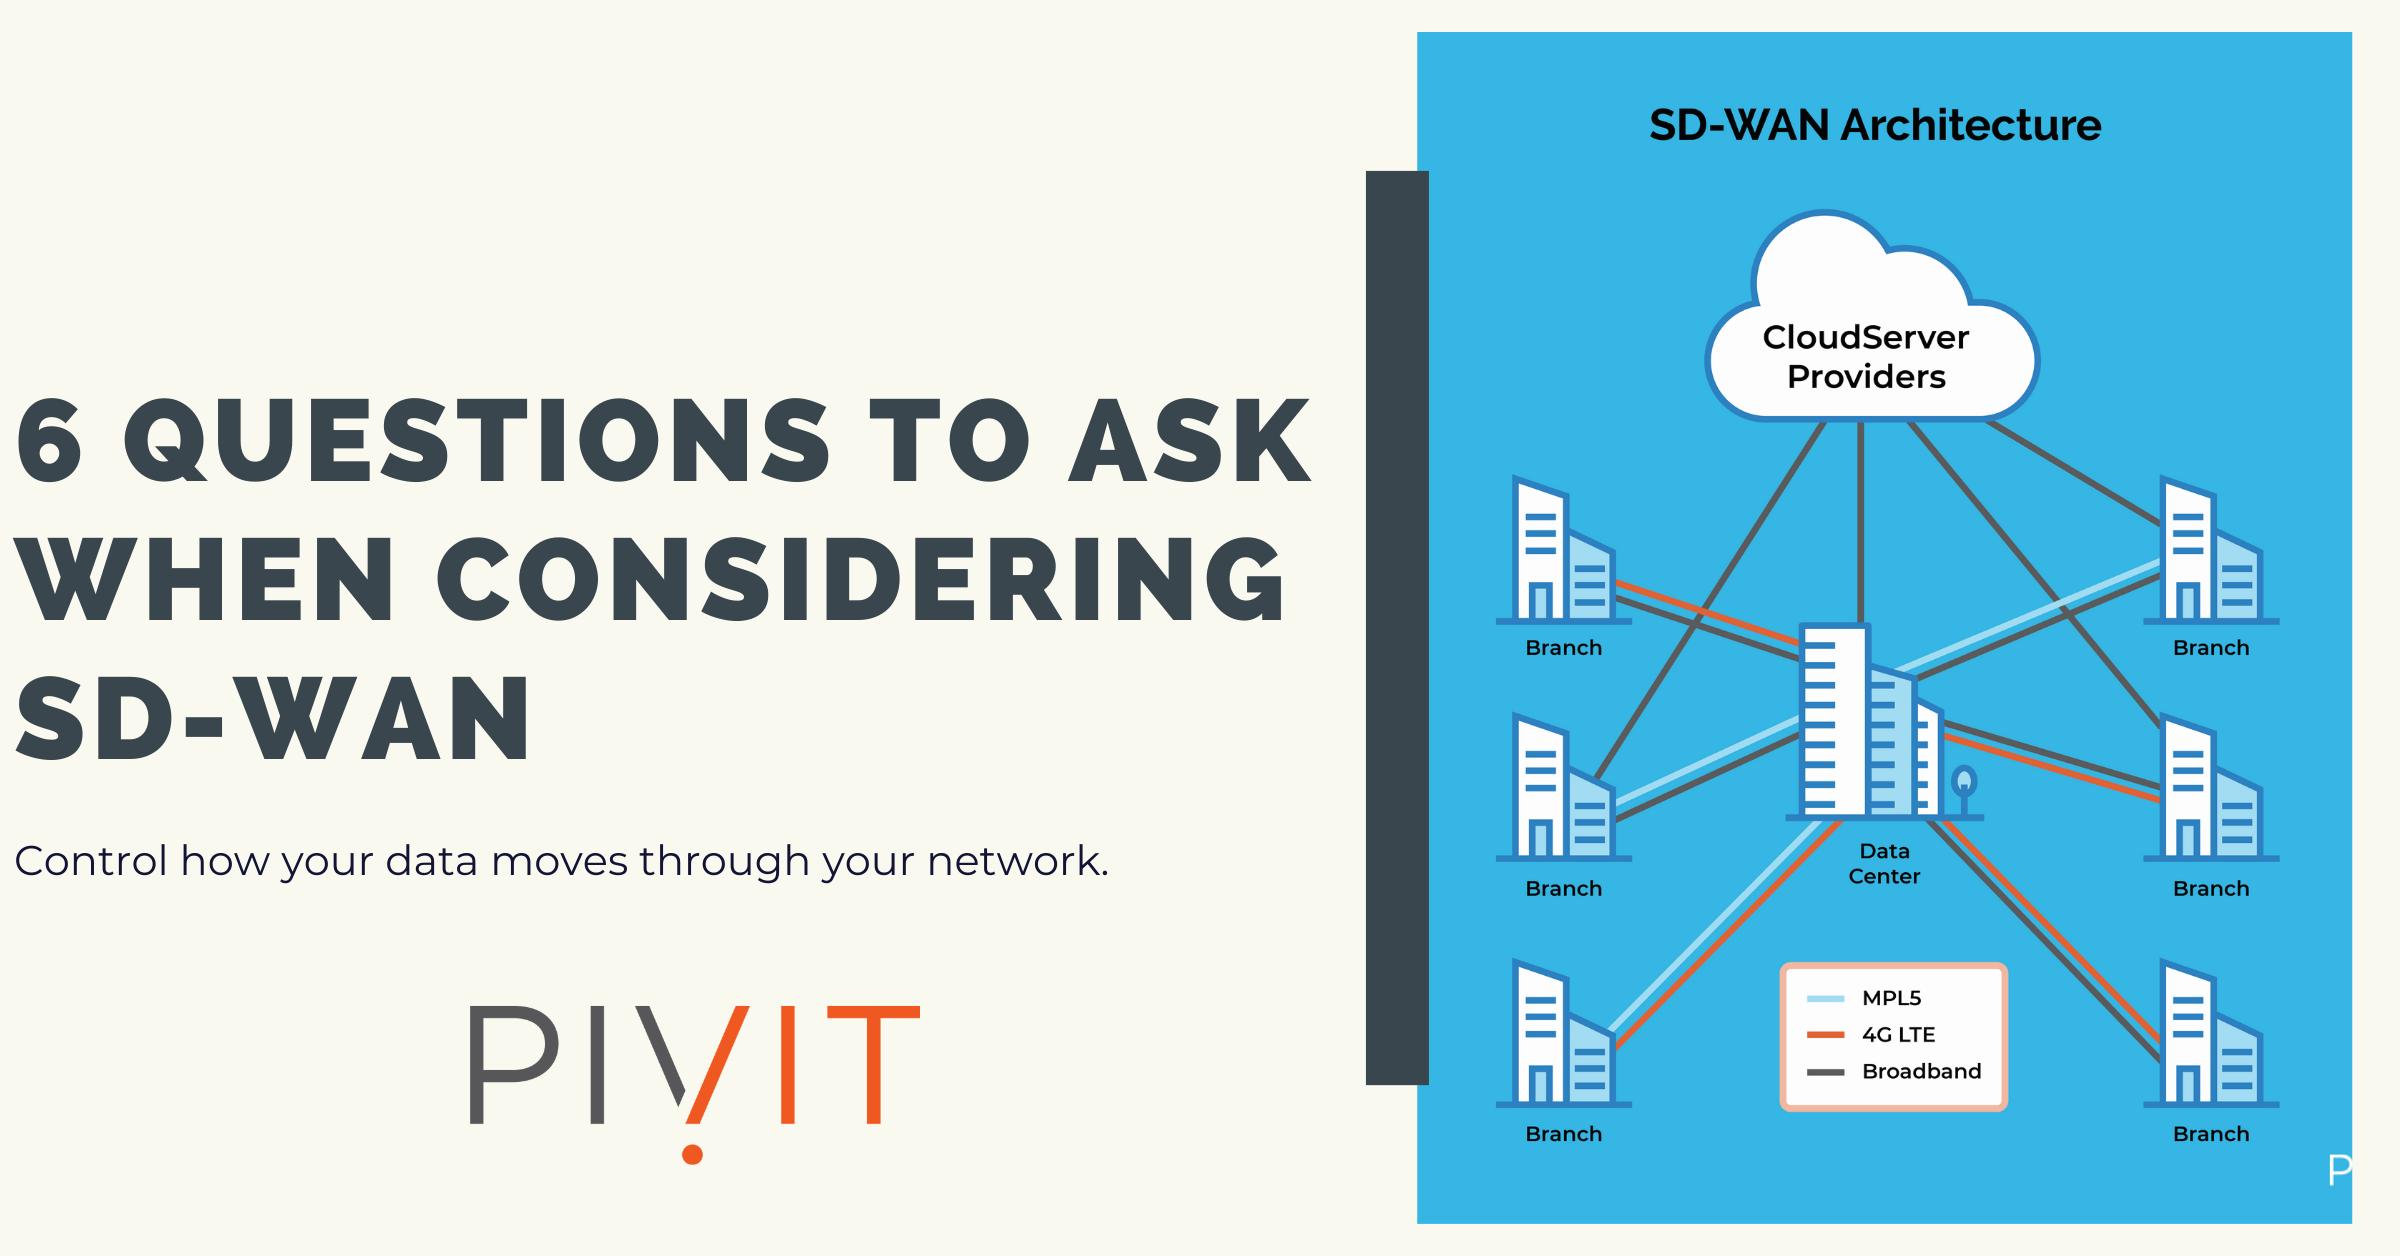 sd-wan architecture and everything you need to know when considering sd-wan from pivit global